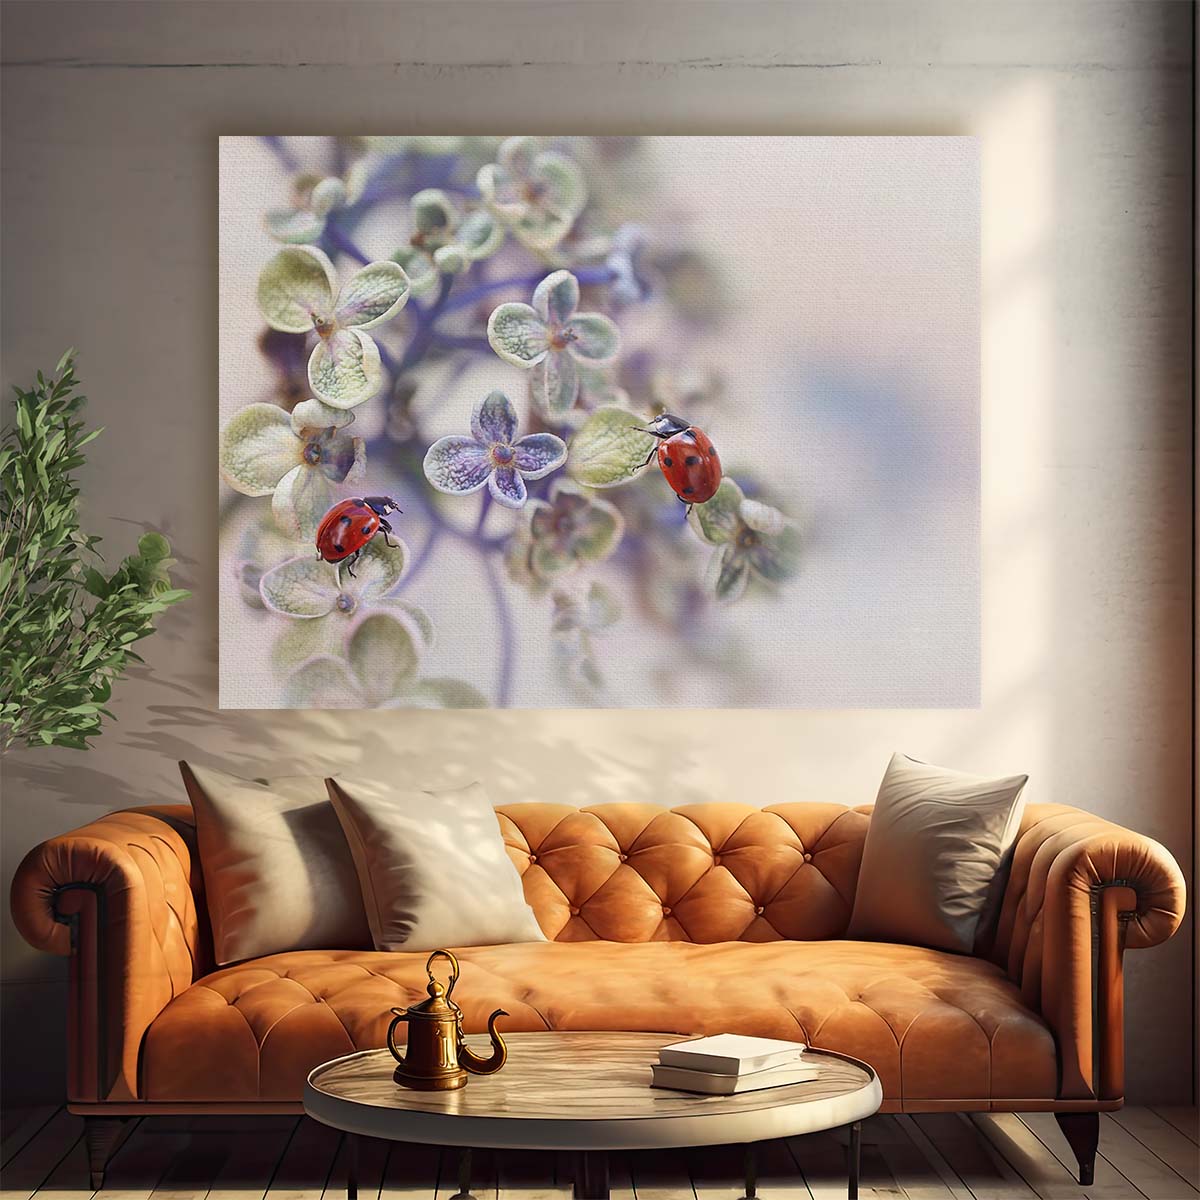 Macro Floral Ladybug Encounter Nature Wall Art by Luxuriance Designs. Made in USA.